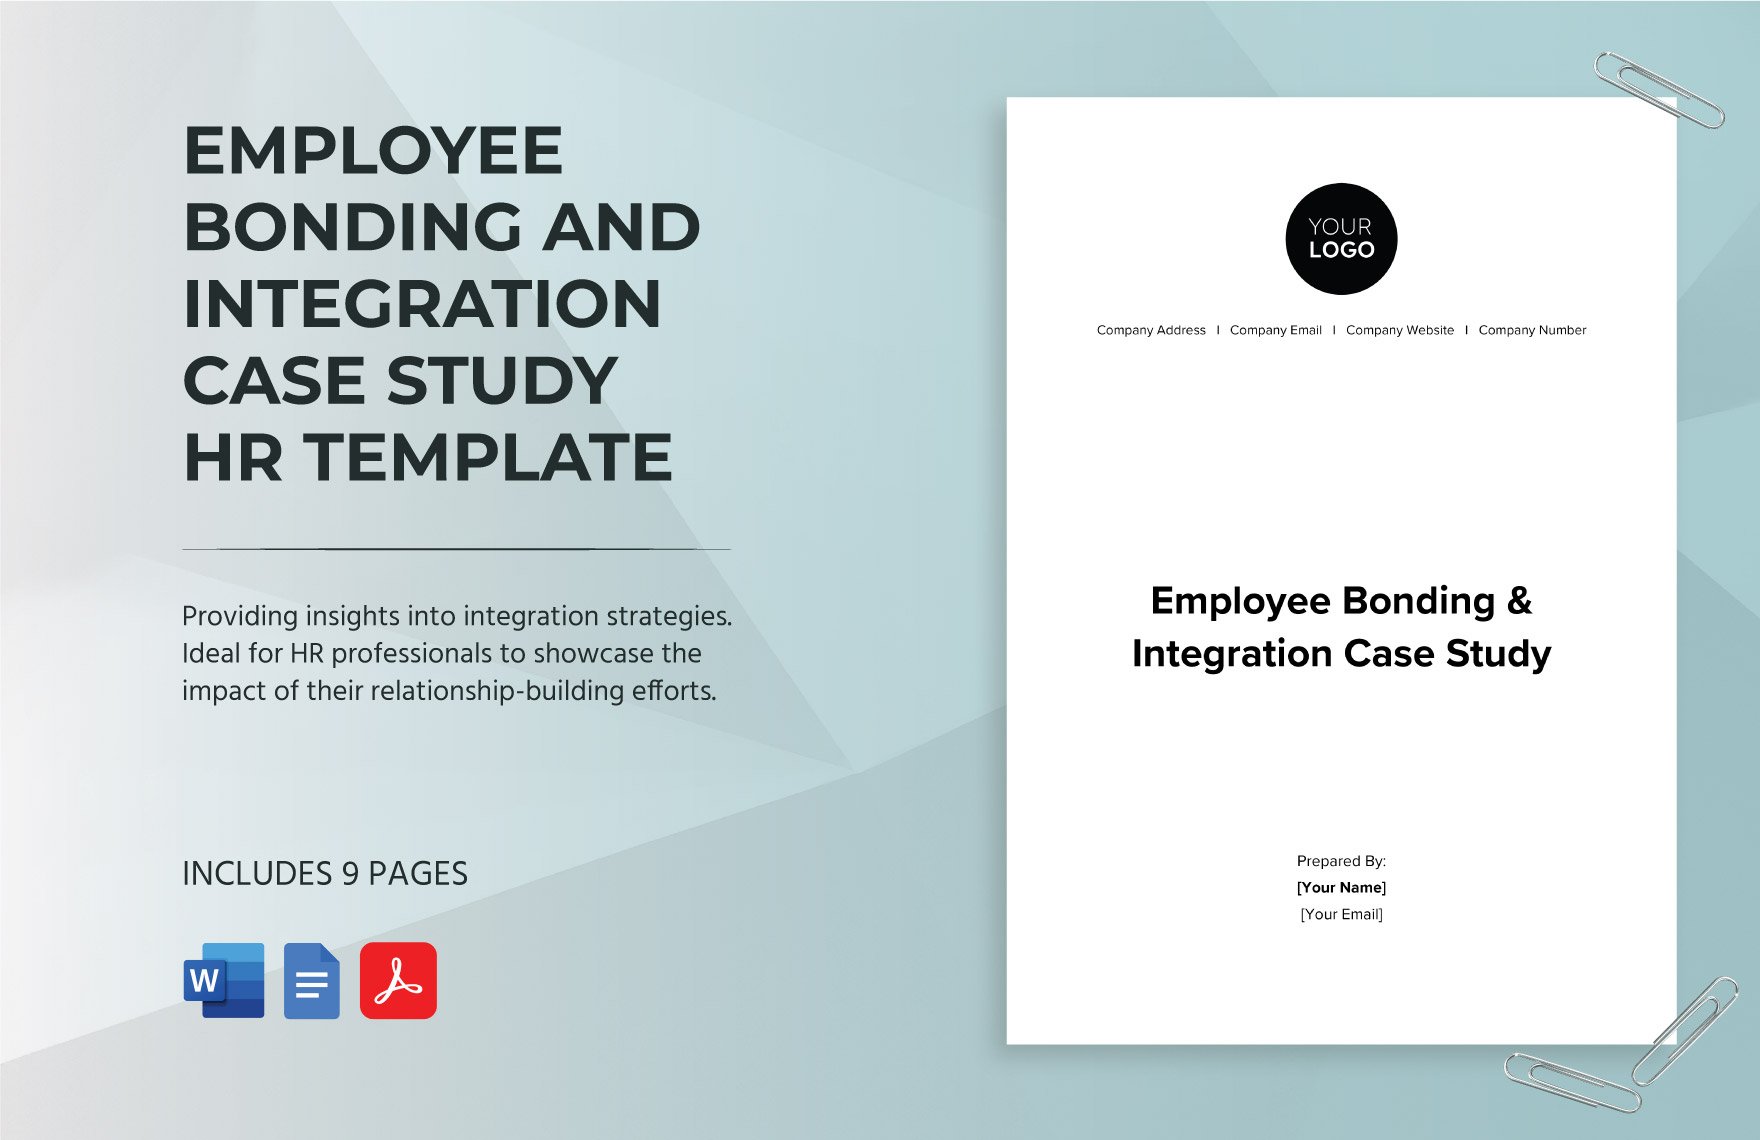 Employee Bonding and Integration Case Study HR Template in Word, Google Docs, PDF